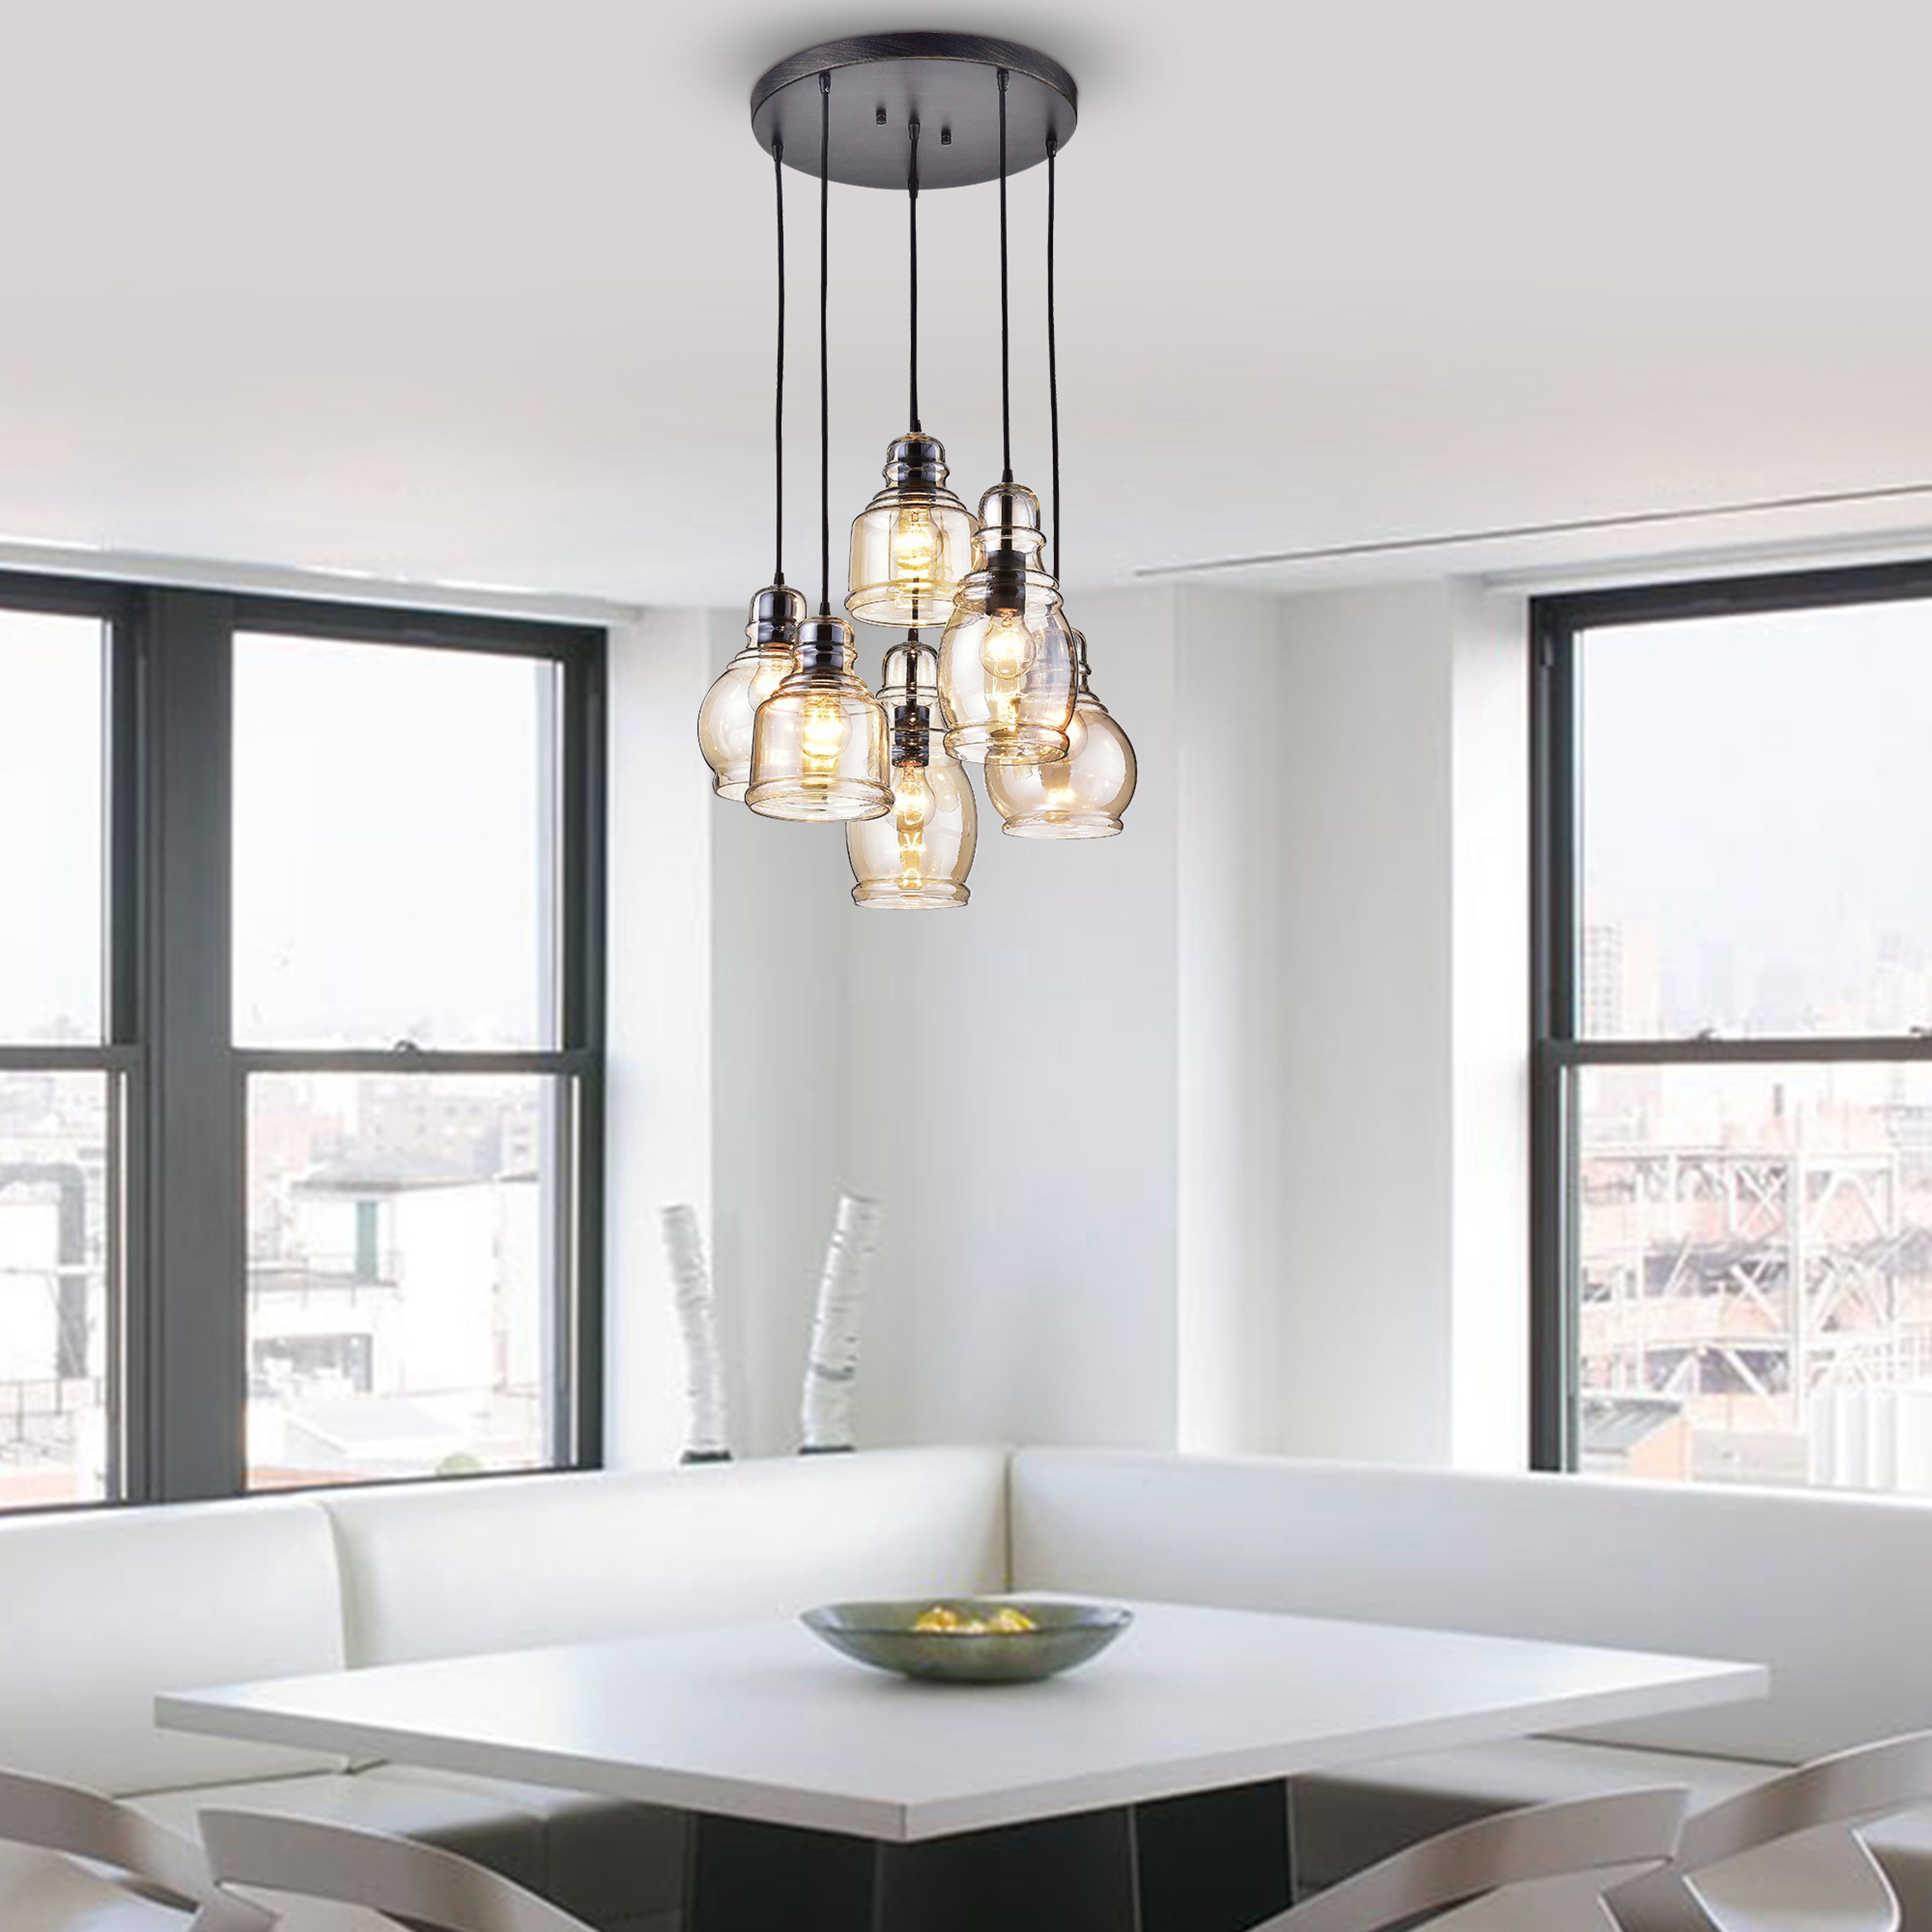 4 – 6 Light Cluster Pendant Lighting You'll Love In 2019 Within Latest Schutt 5 Light Cluster Pendants (View 4 of 25)